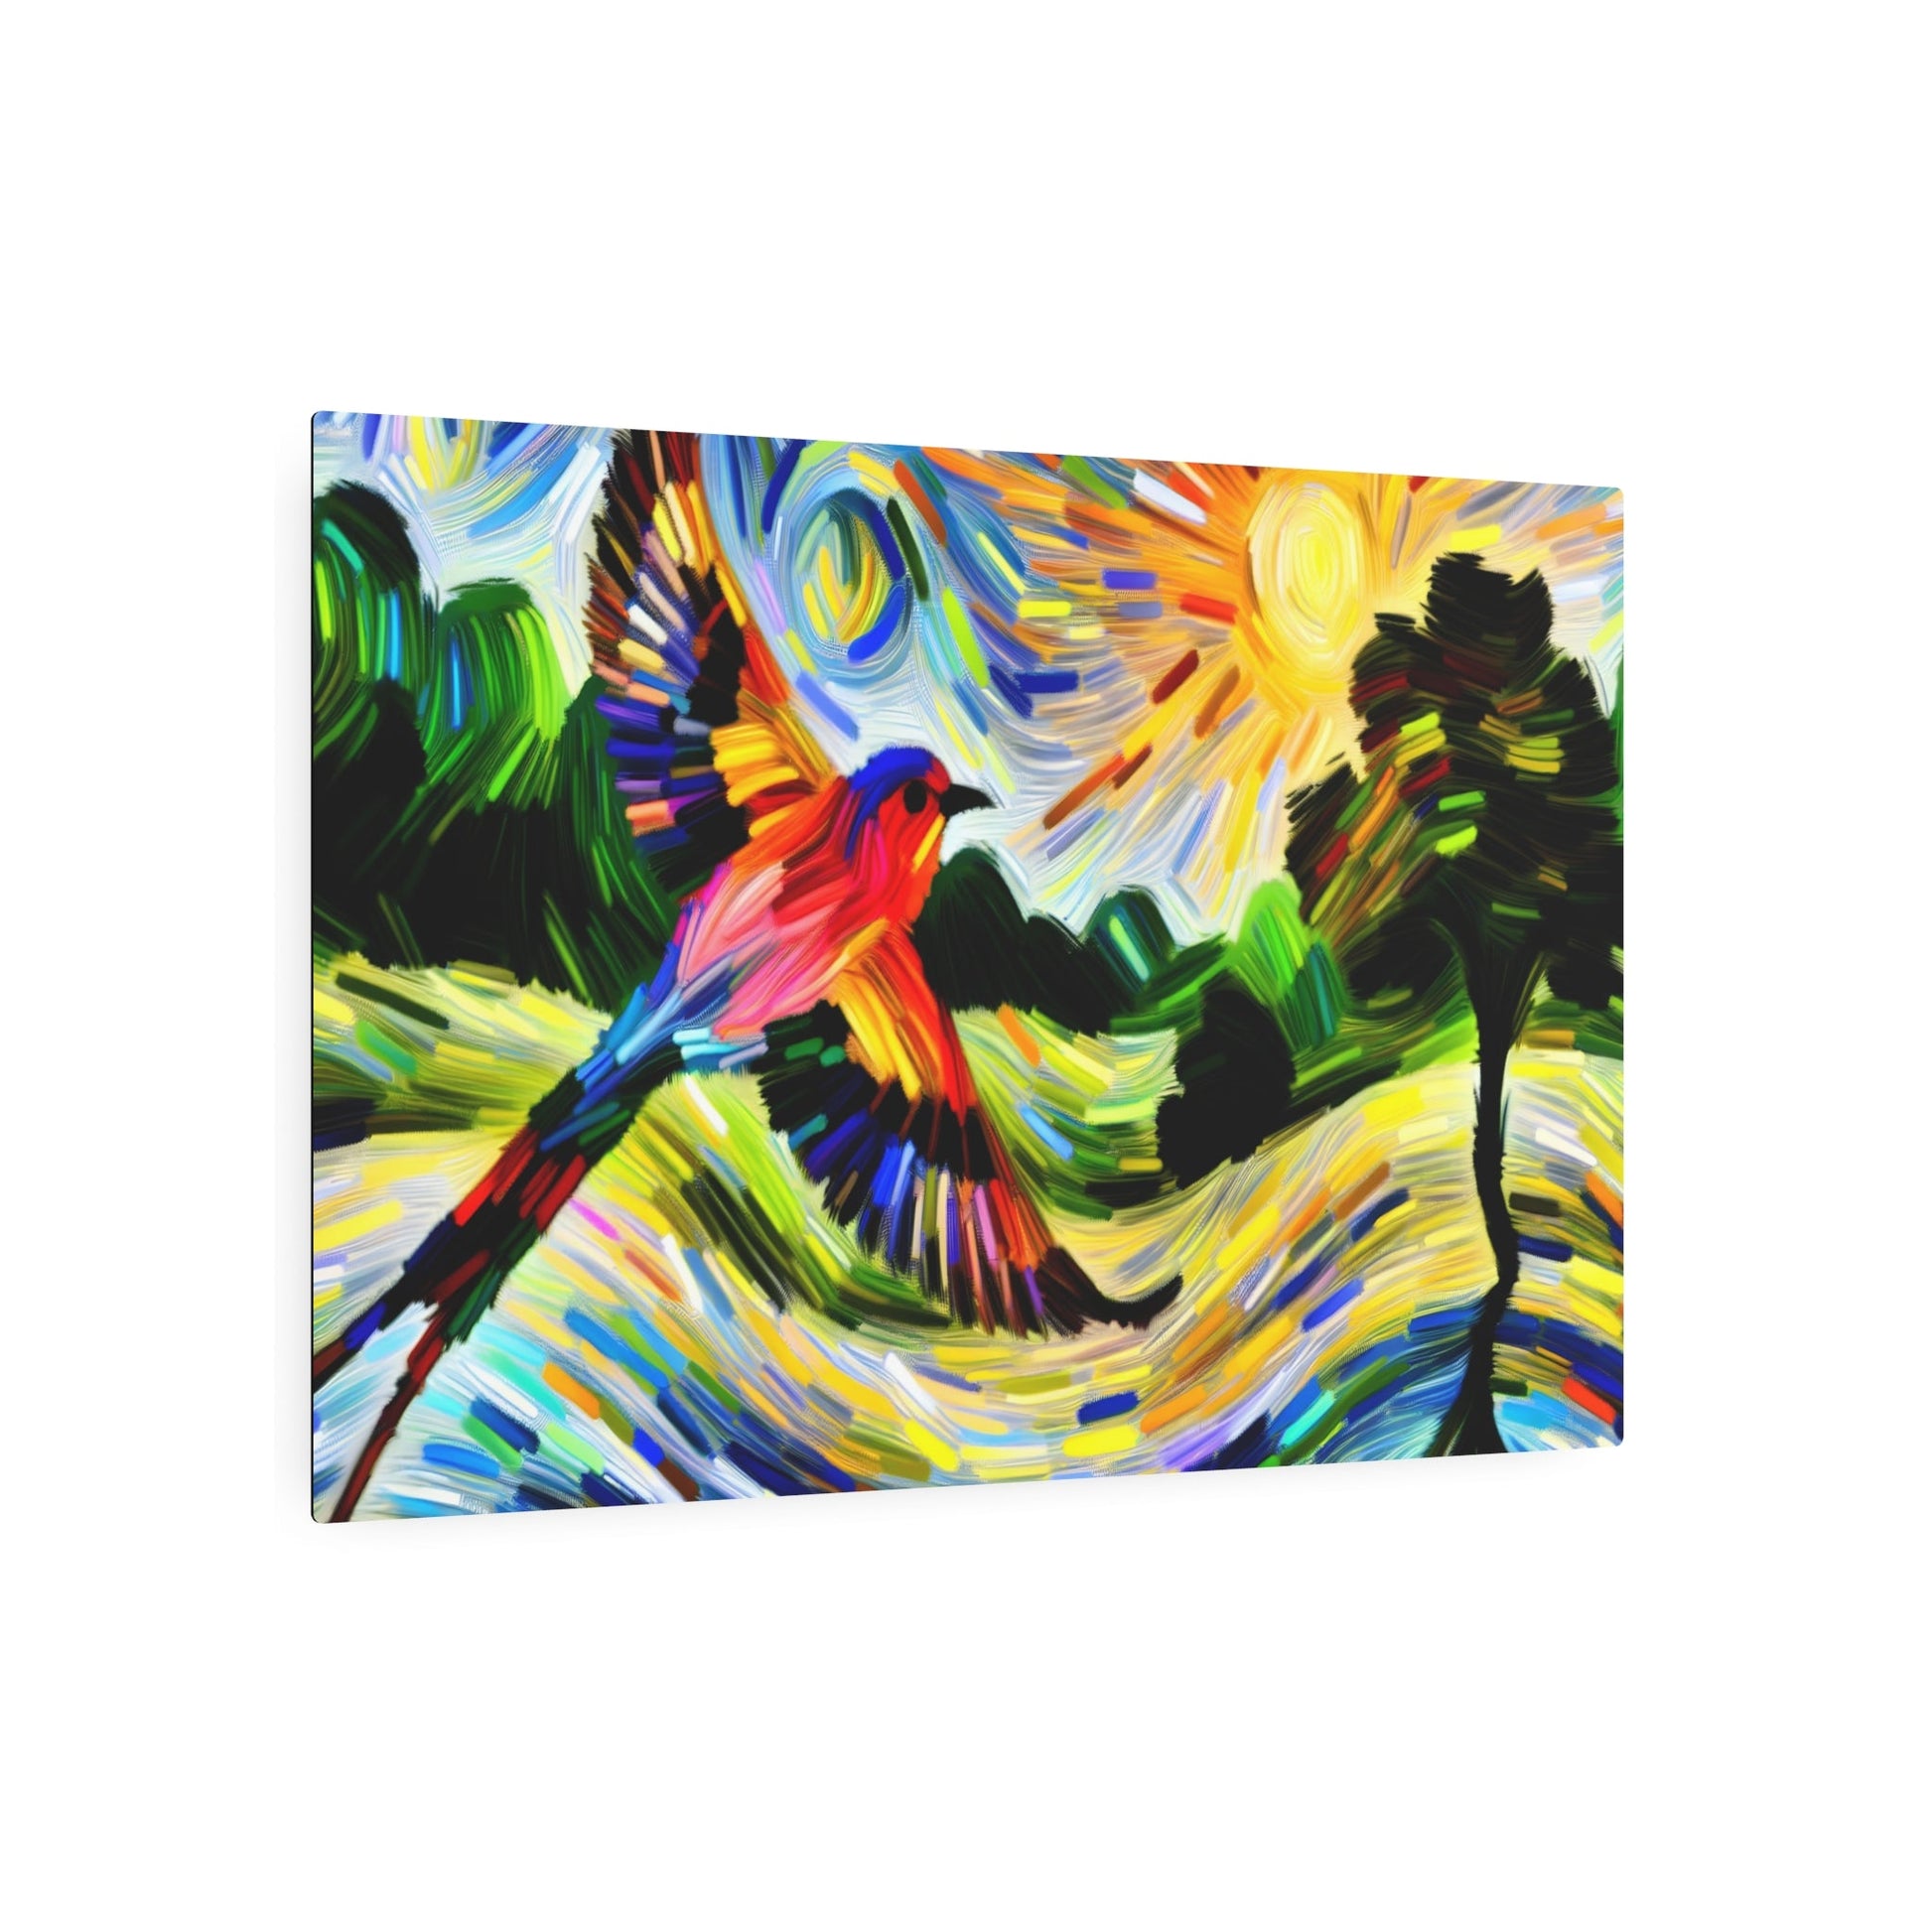 Metal Poster Art | "Impressionist Style Western Art - Vibrant Bird Flying Over Colorful Landscape, Detailed Featherwork and Lively Nature Elements" - Metal Poster Art 36″ x 24″ (Horizontal) 0.12''